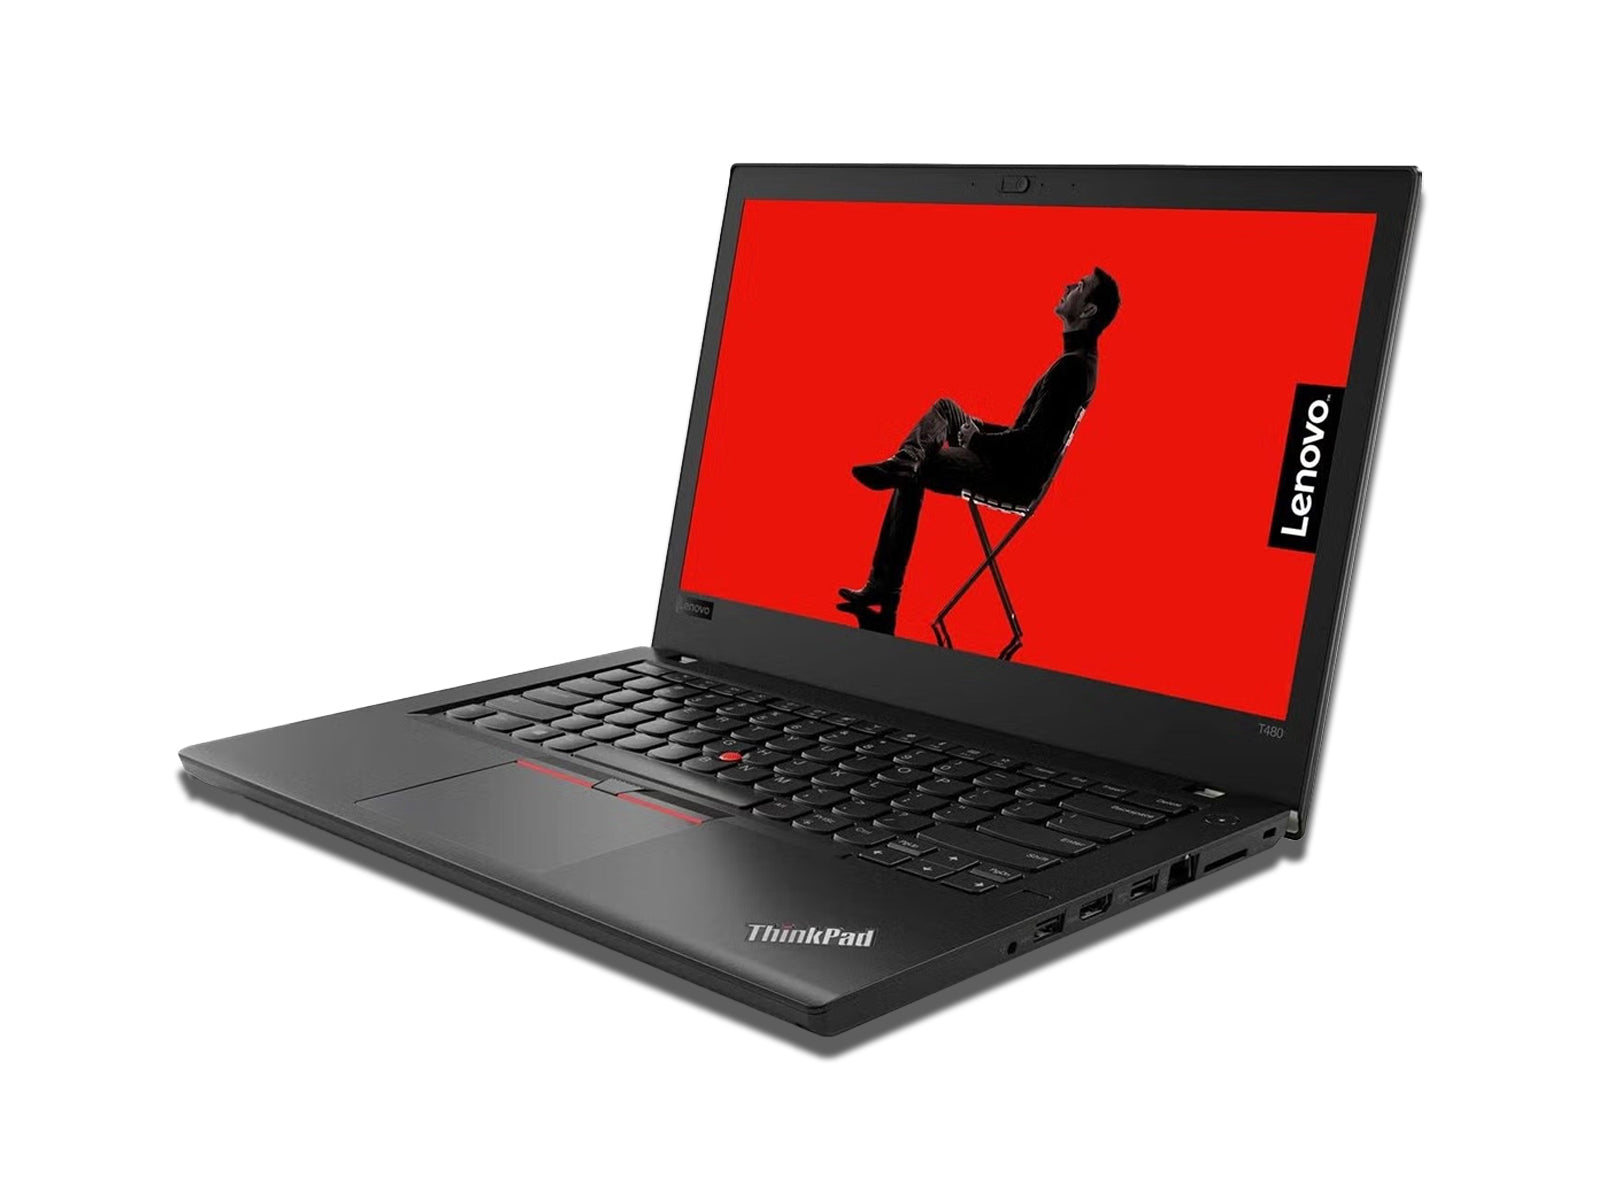 Image Showing Right Side View of The Lenovo T480 Laptop on The White Background